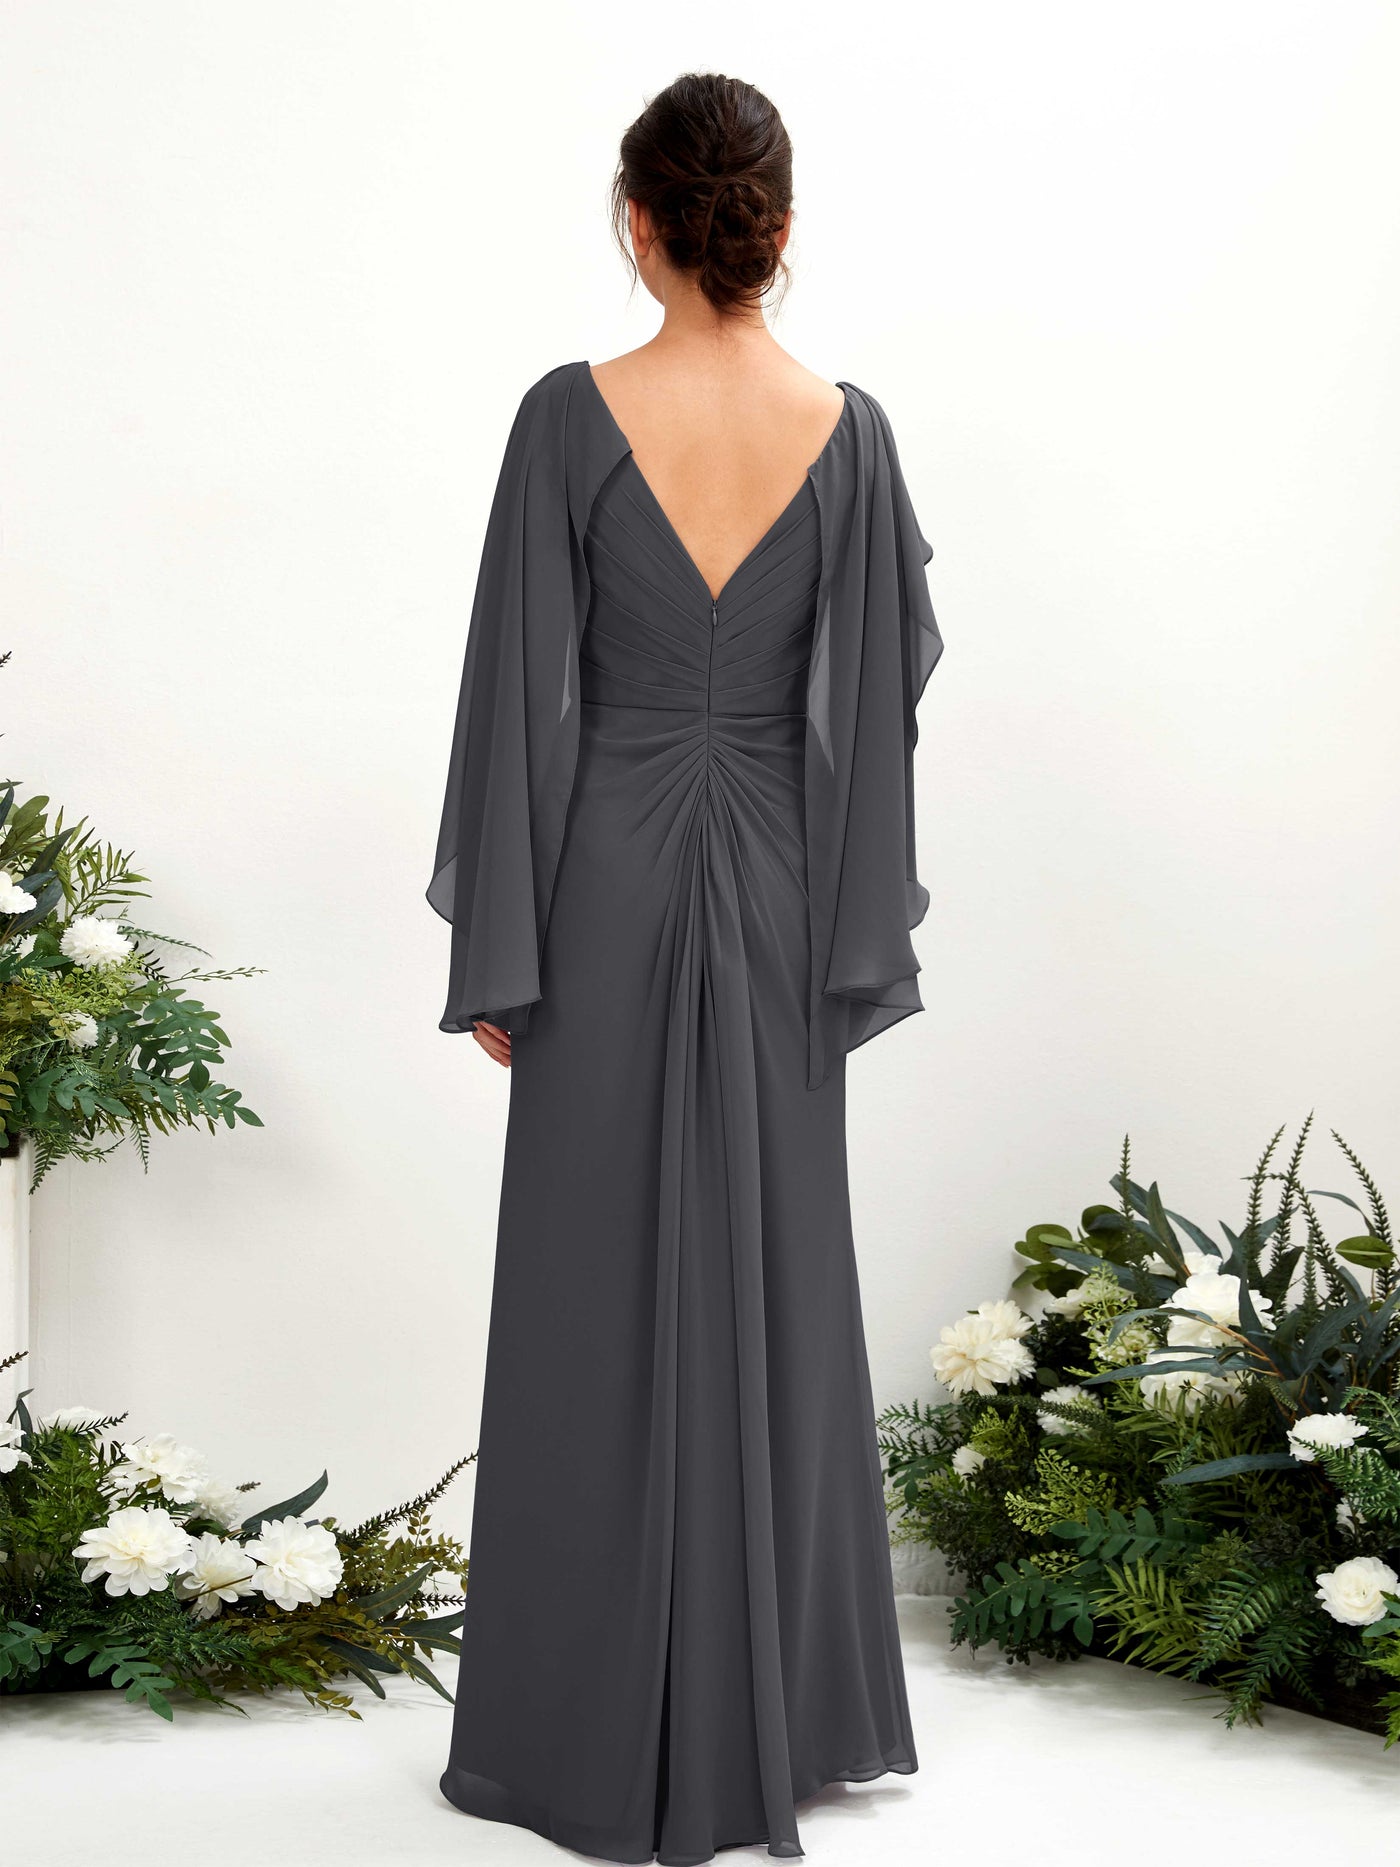 Pewter Bridesmaid Dresses Bridesmaid Dress A-line Chiffon Straps Full Length Long Sleeves Wedding Party Dress (80220138)#color_pewter